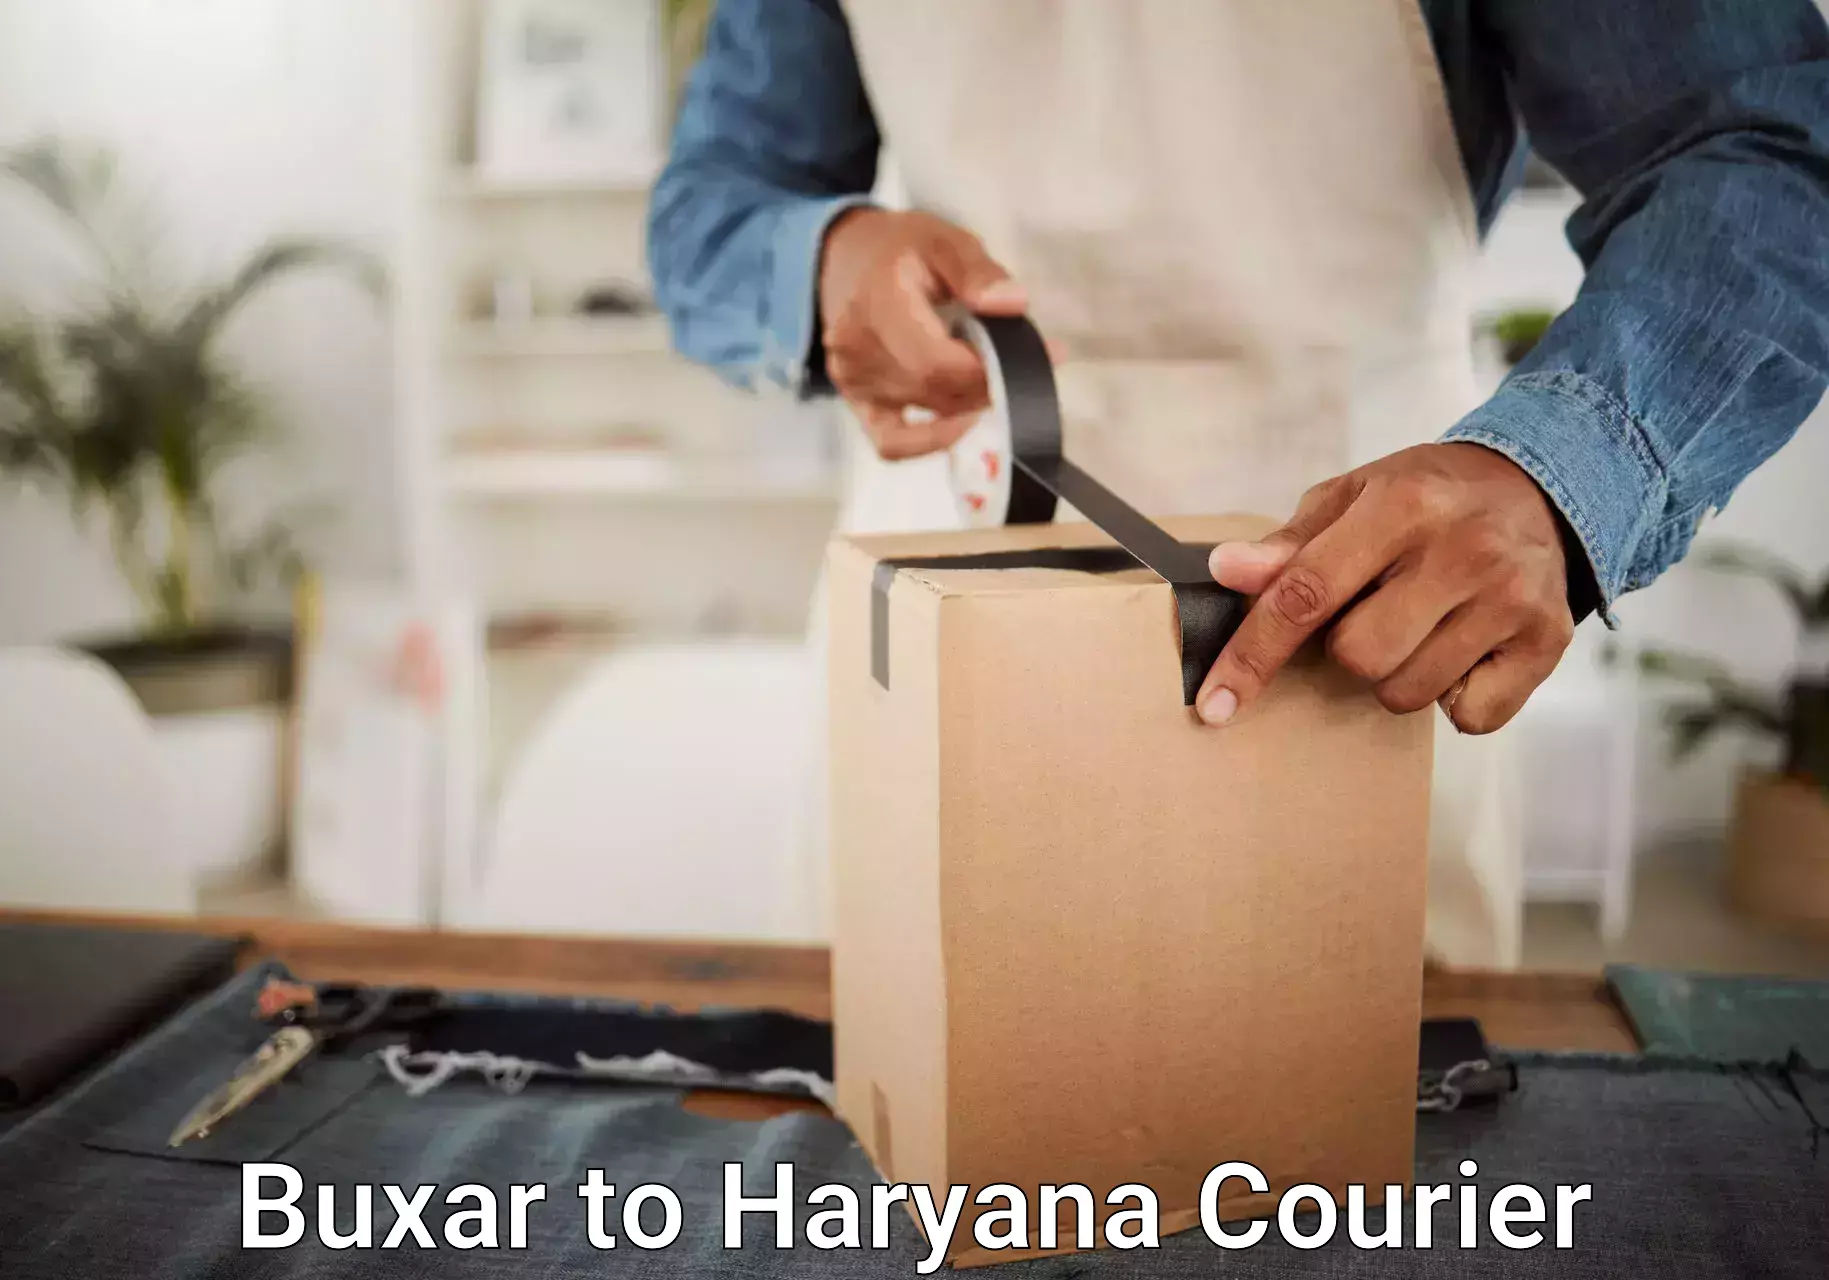 Luggage delivery app Buxar to Haryana